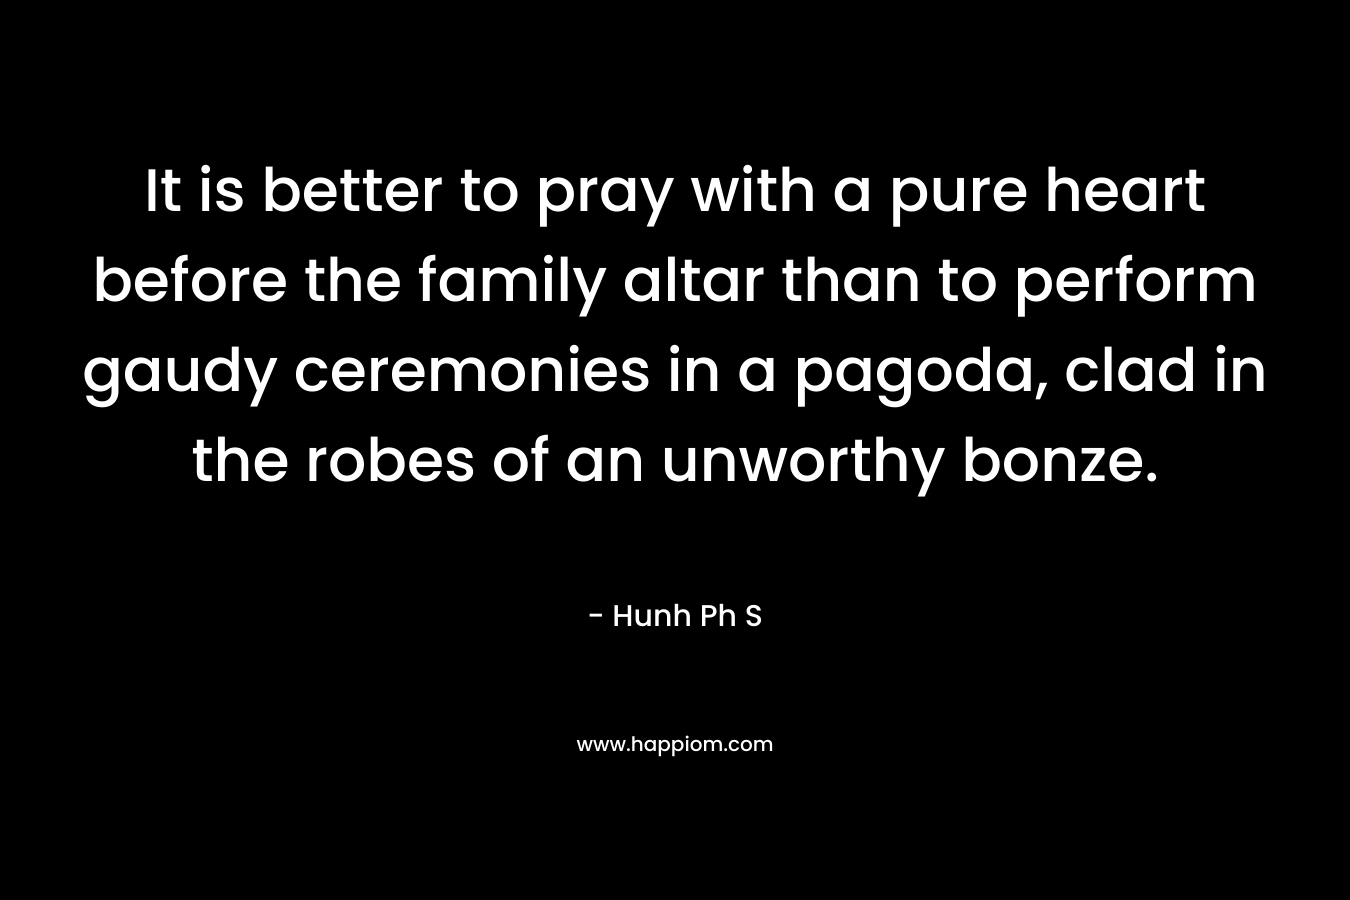 It is better to pray with a pure heart before the family altar than to perform gaudy ceremonies in a pagoda, clad in the robes of an unworthy bonze.